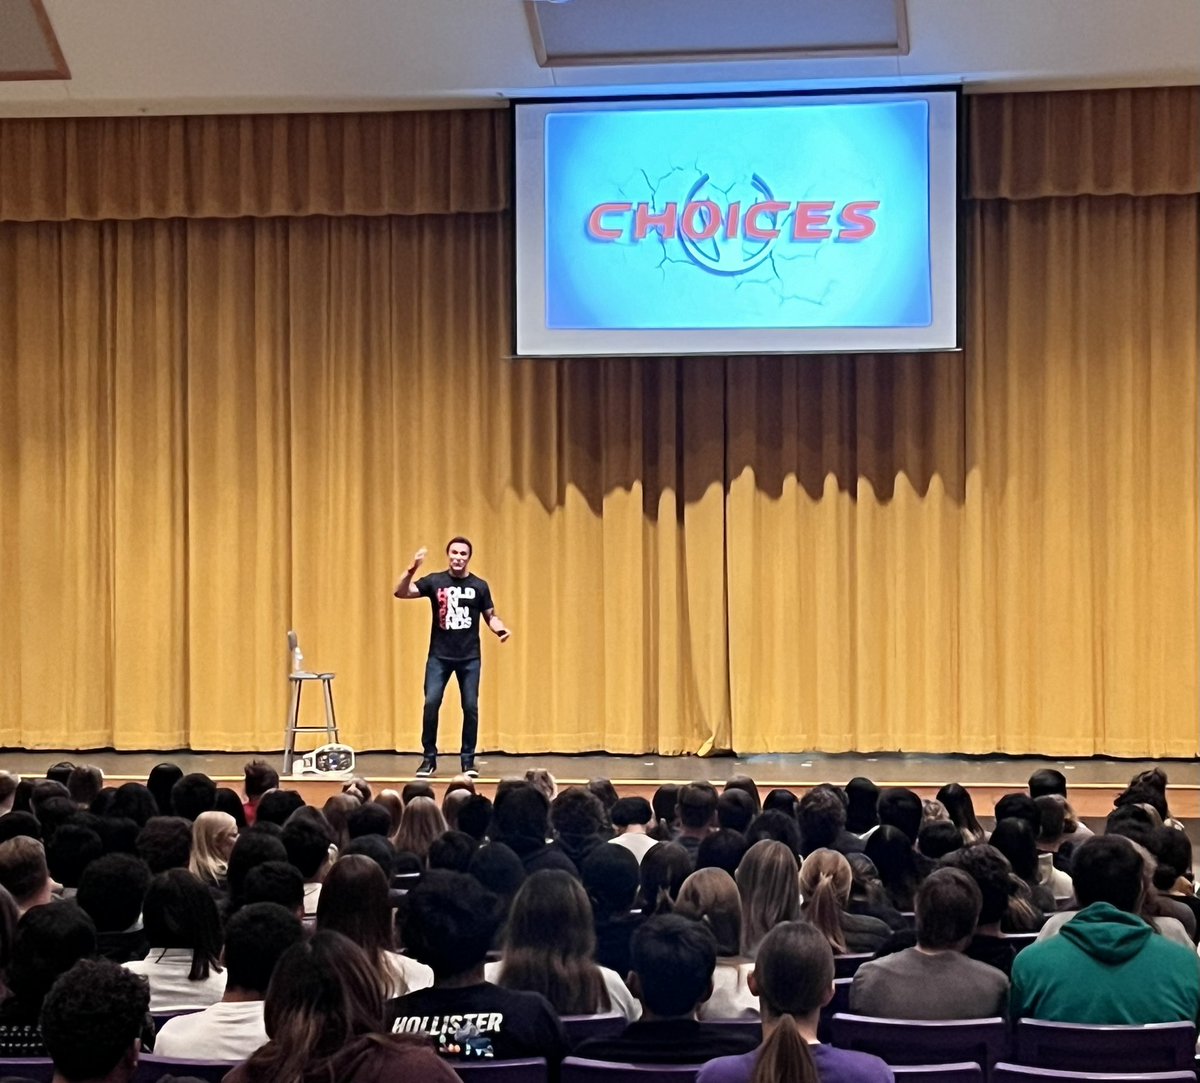 Today at Dalhart High School in Texas was everything and more I hoped it would be. Thank you to PTO President Angela Lusk for helping to make this happen! The most enjoyable part was at the end of the presentation meeting with students. No greater joy than changing a life!…